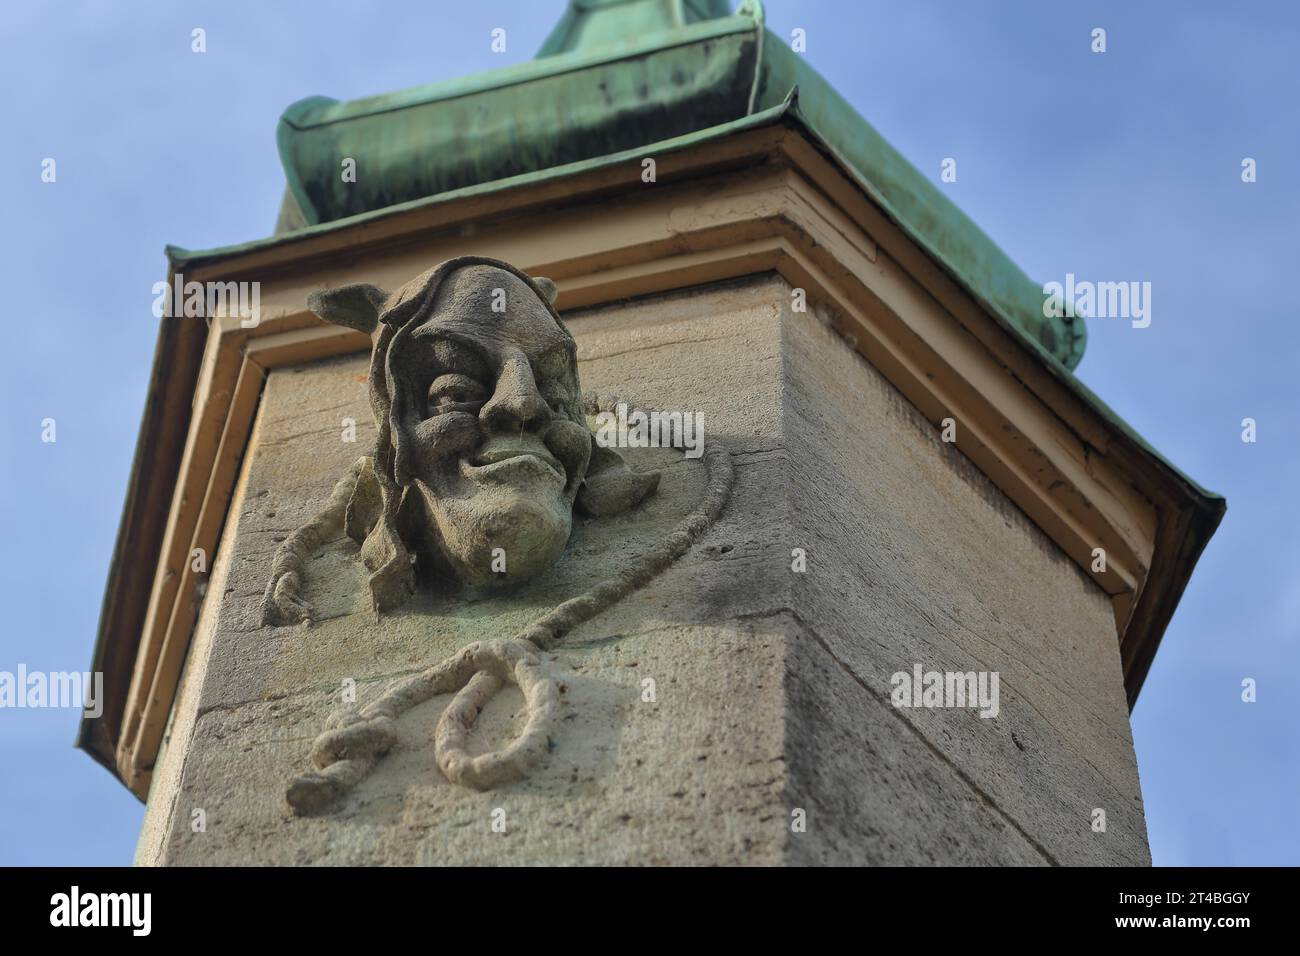 Relief of the executioner figure at the hangman's house, historical, sculpture, devil, face, head, grimace, ugly, grin, rope, noose, horns, stone Stock Photo